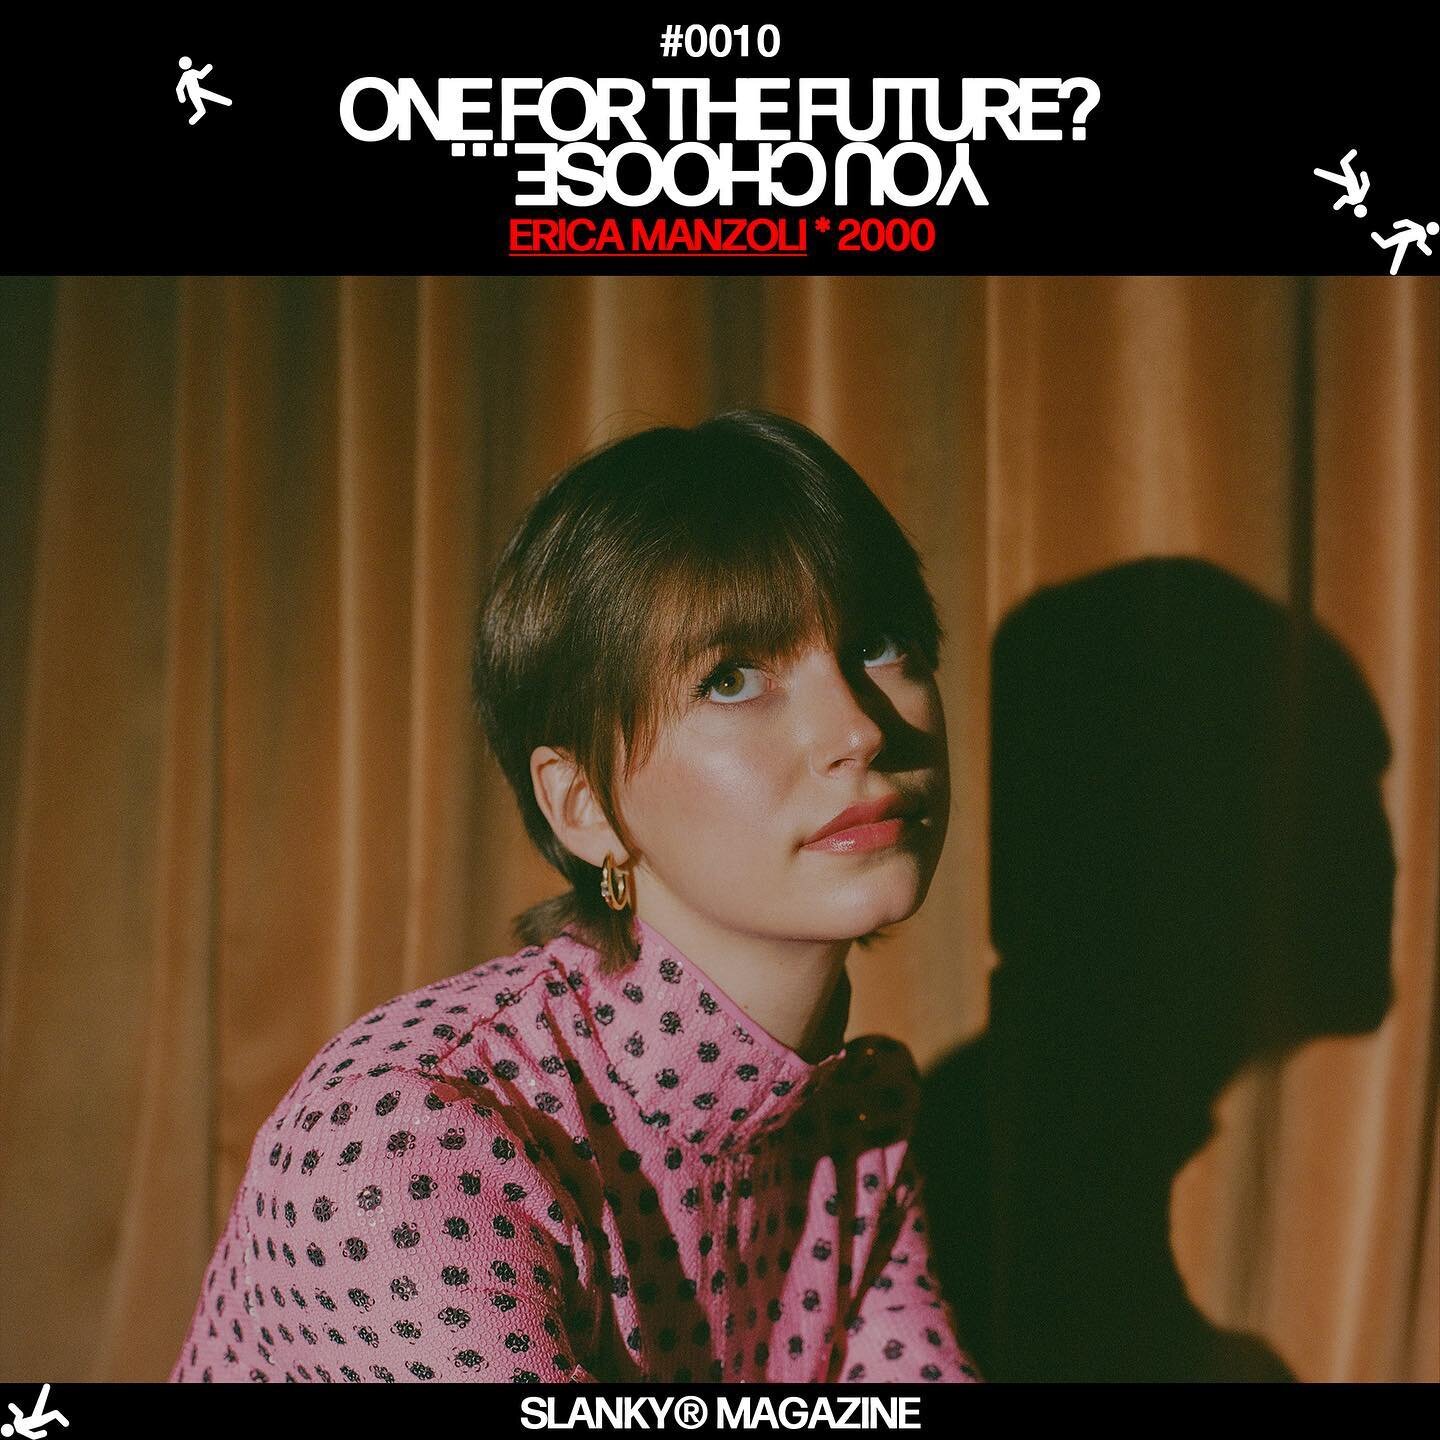 ONE FOR THE FUTURE? YOU CHOOSE&hellip; ✅

Last week, we spoke to the wonderful @erica.manzoli about her new track &ldquo;The Stages of Grief&rdquo; before adding her to our renowned list of &ldquo;One For The Future? You Choose&hellip;&rdquo; section